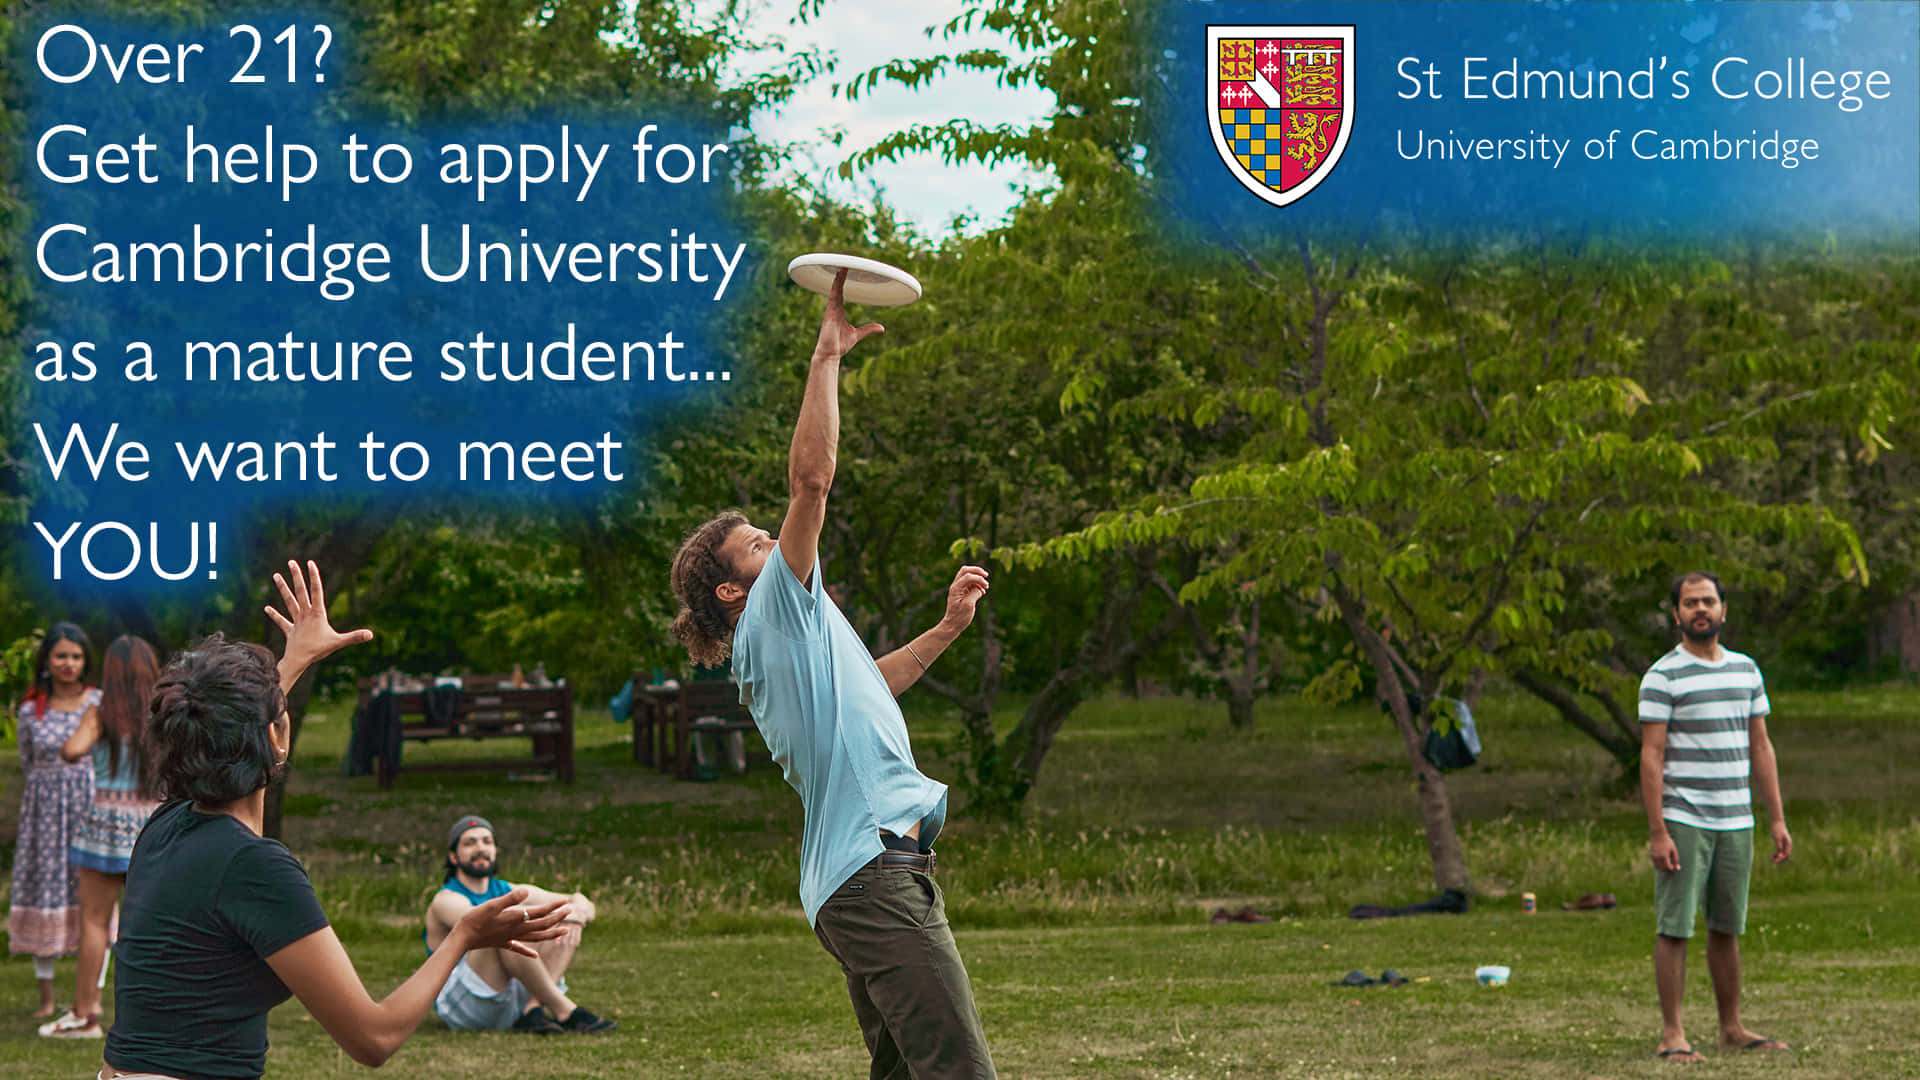 St. Edmund's College 1920x1080 Ultimate Frisbee Background Poster